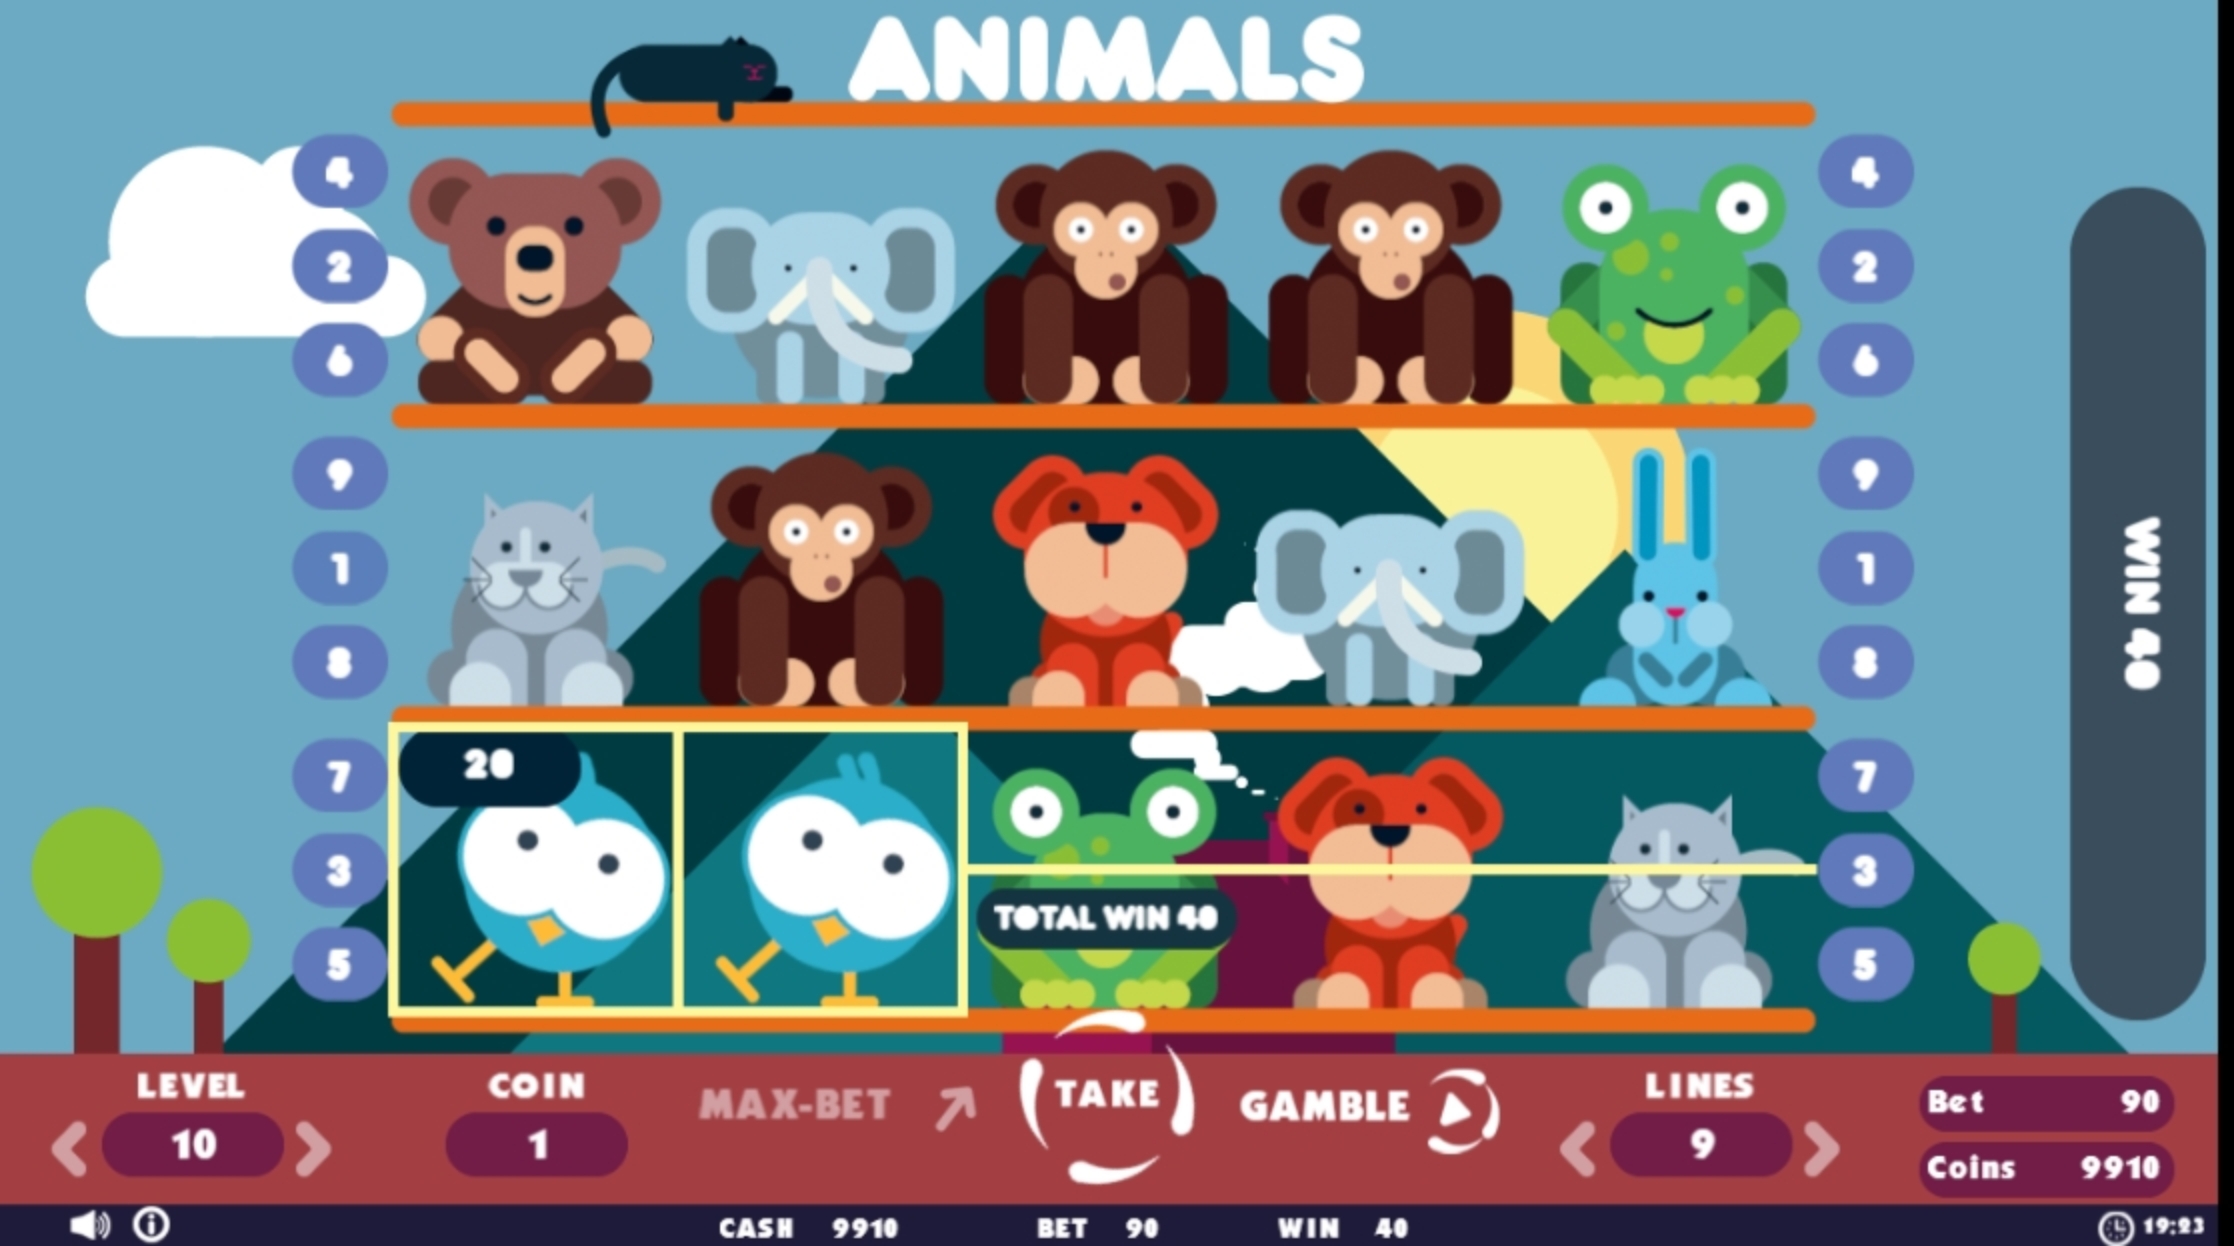 Win Money in Animals Free Slot Game by Betconstruct